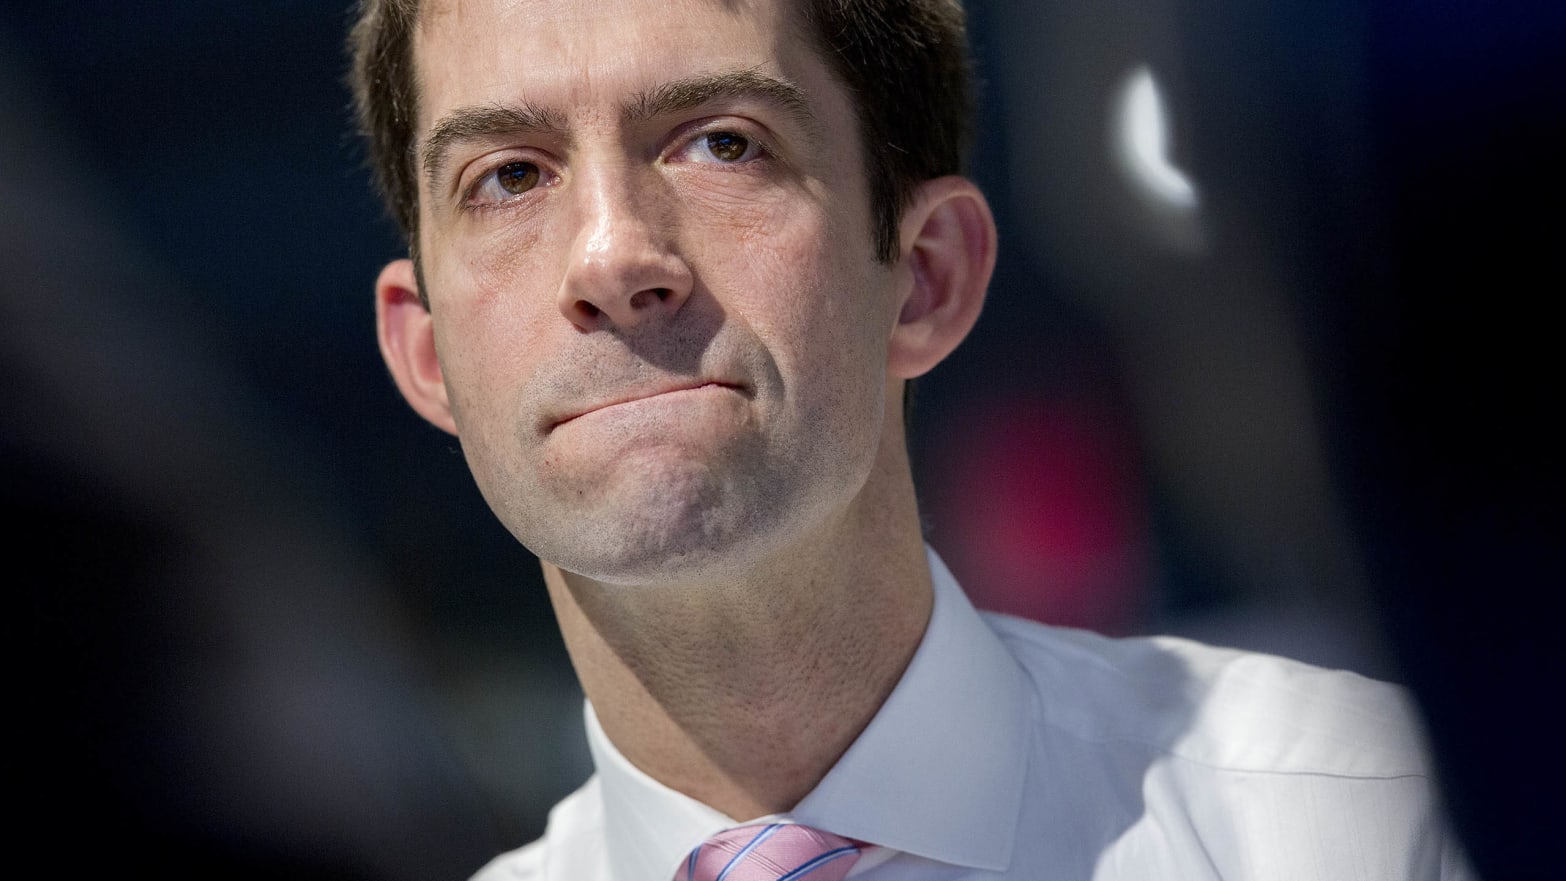 Tom Cotton's nose votes separately from the rest of him. Blank Meme Template